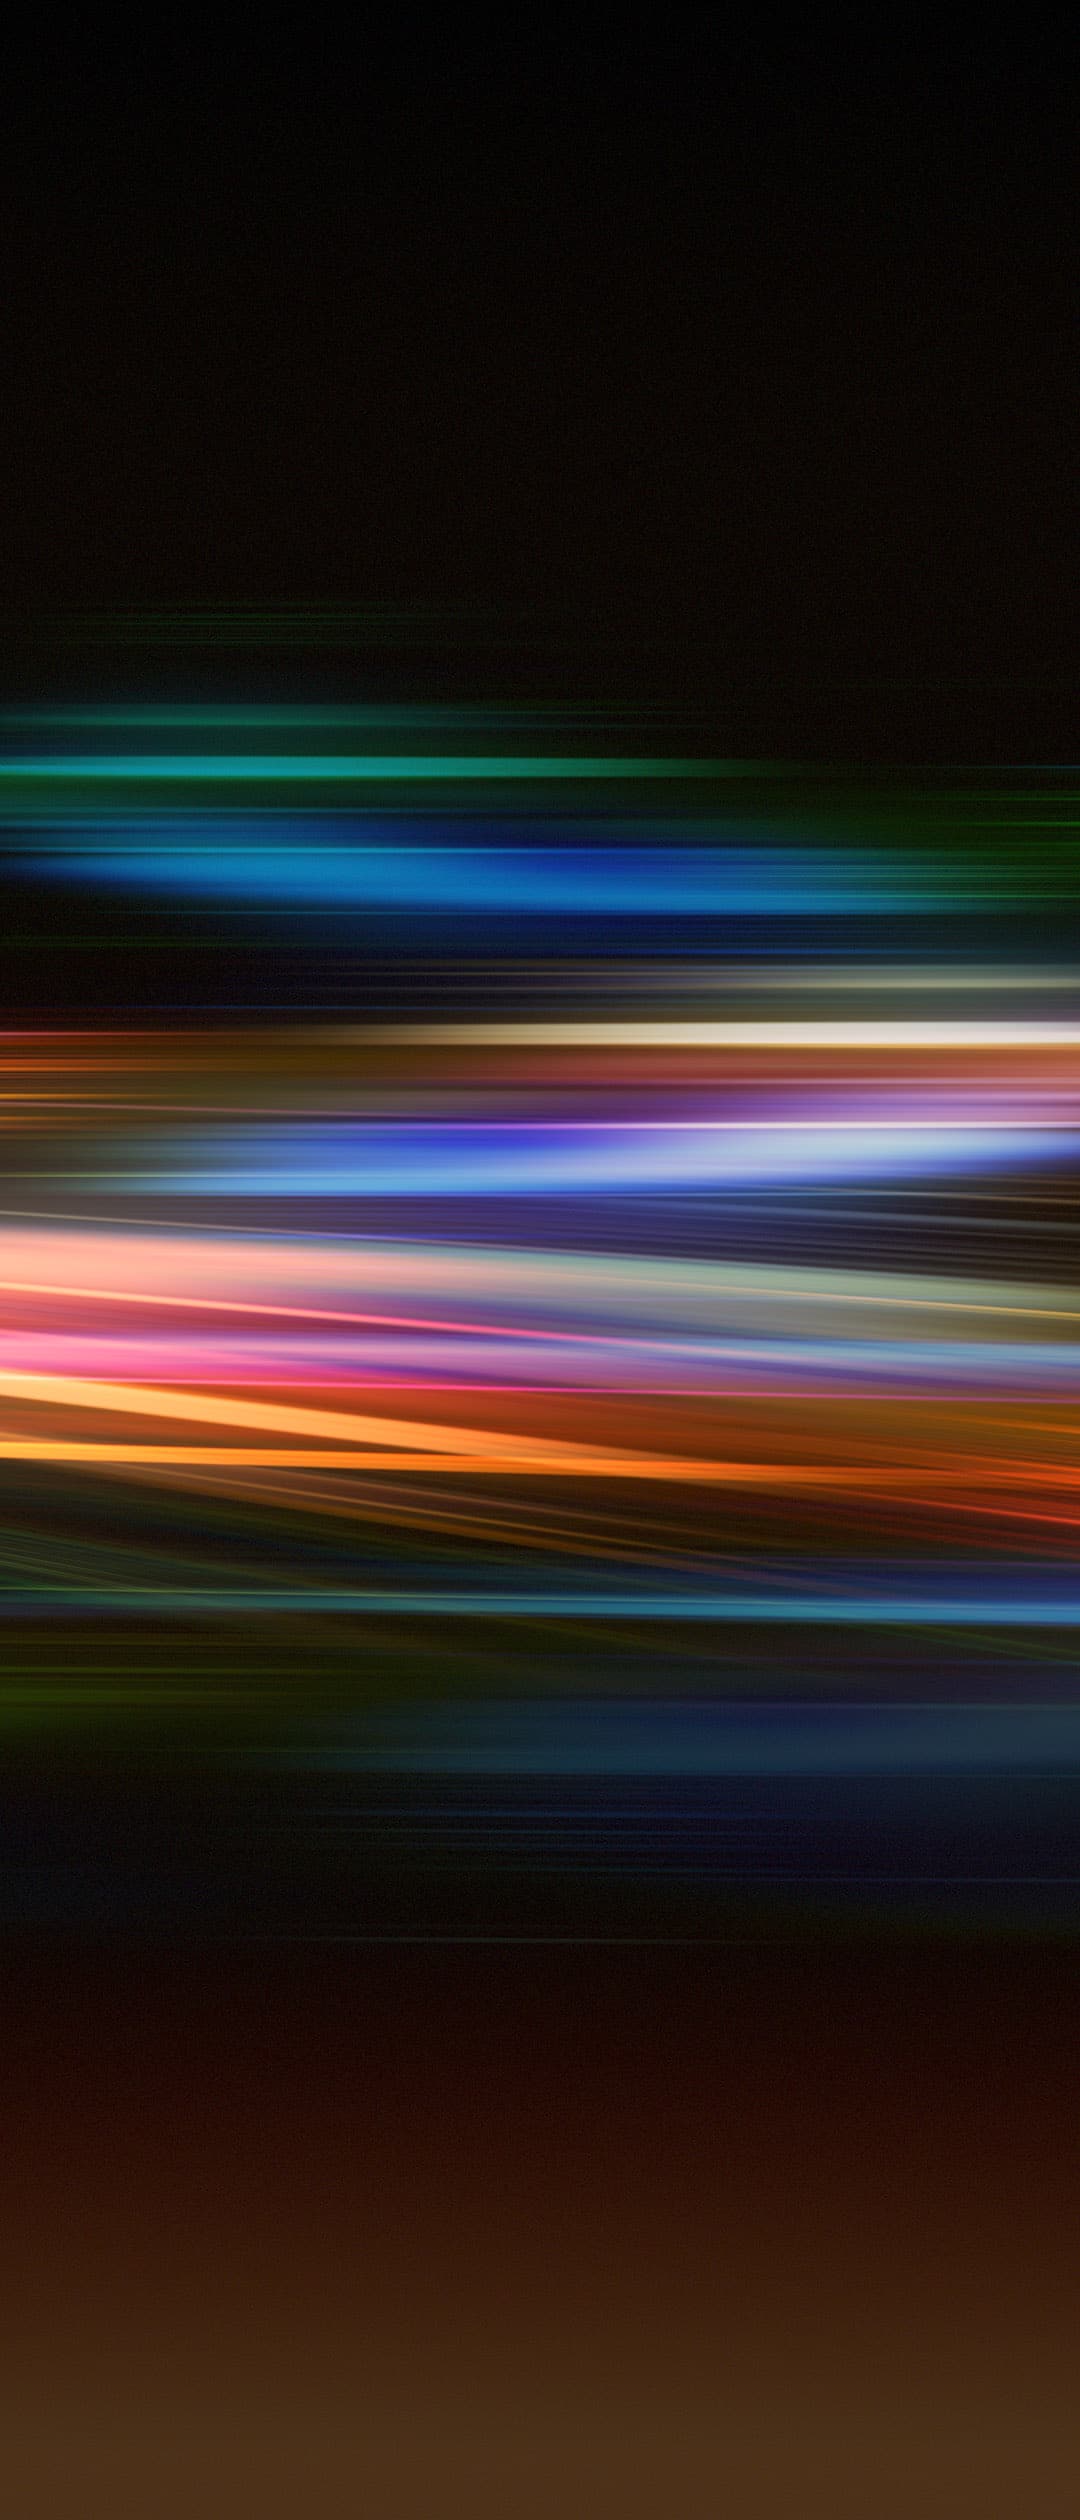 Download Sony Xperia 10/ Xperia 10 Plus Wallpapers - DroidViews